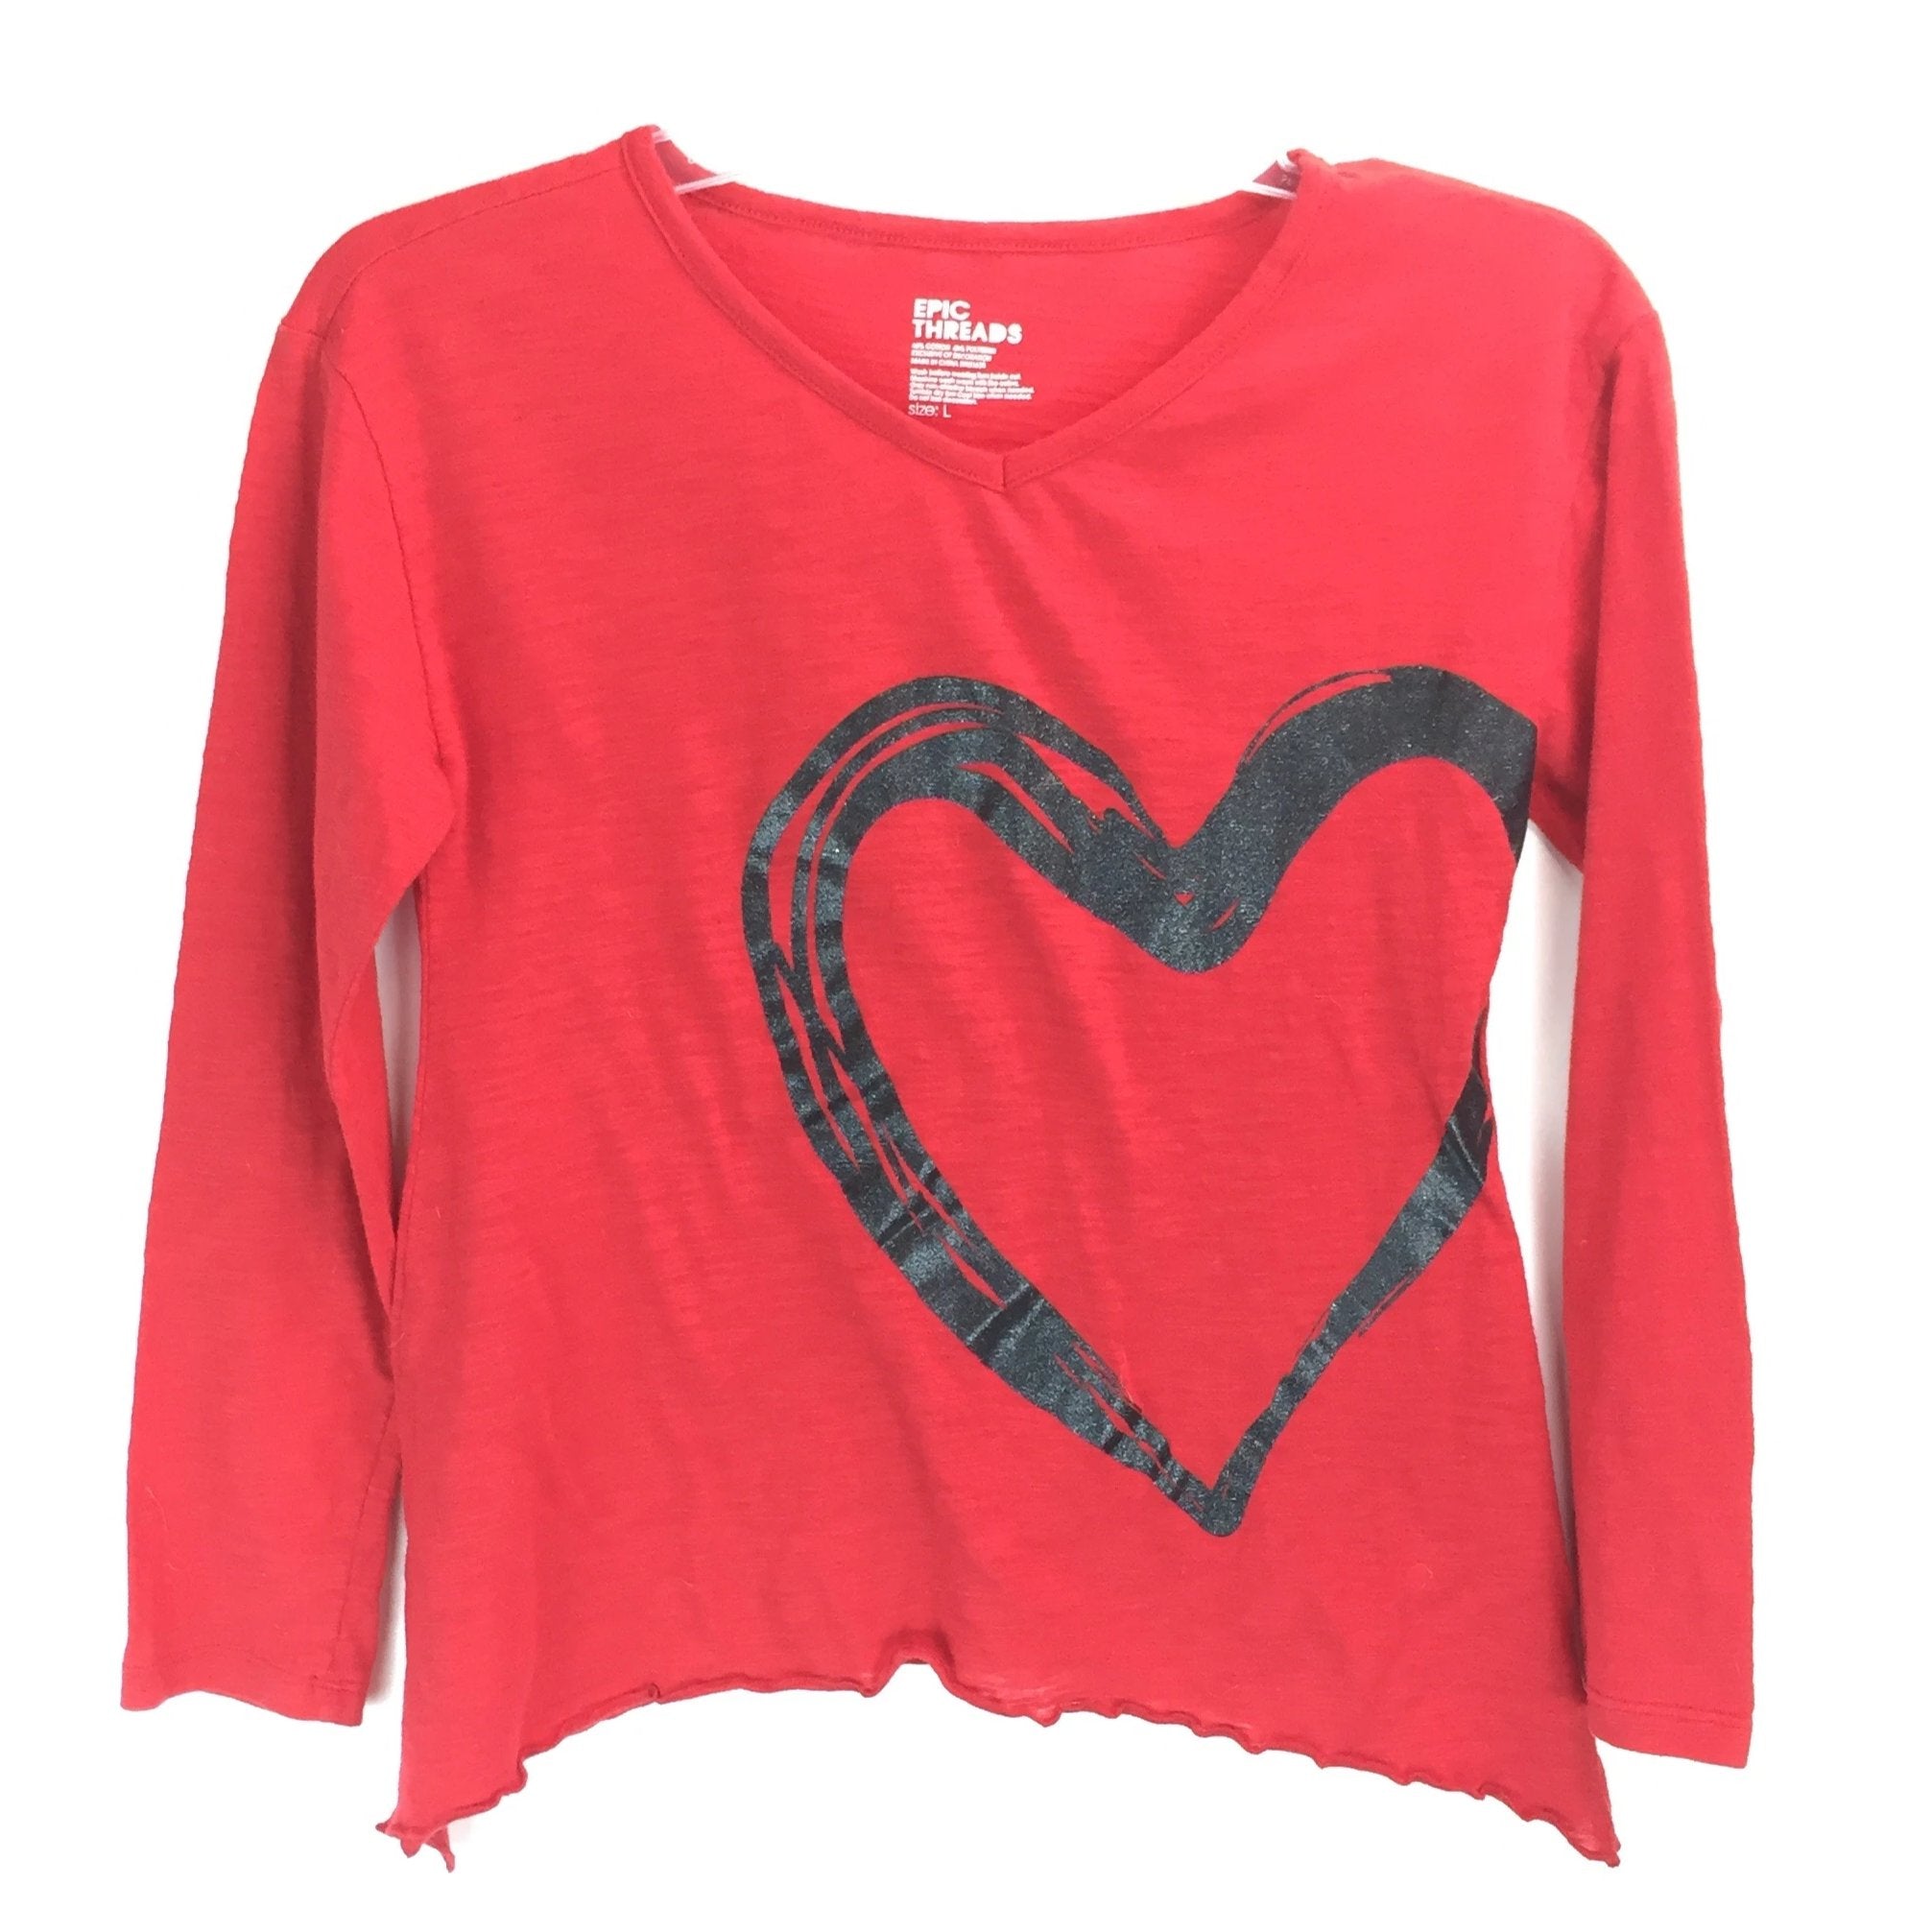 Epic Threads Girls Heart Top - Red Shirt Black Heart - Size Large